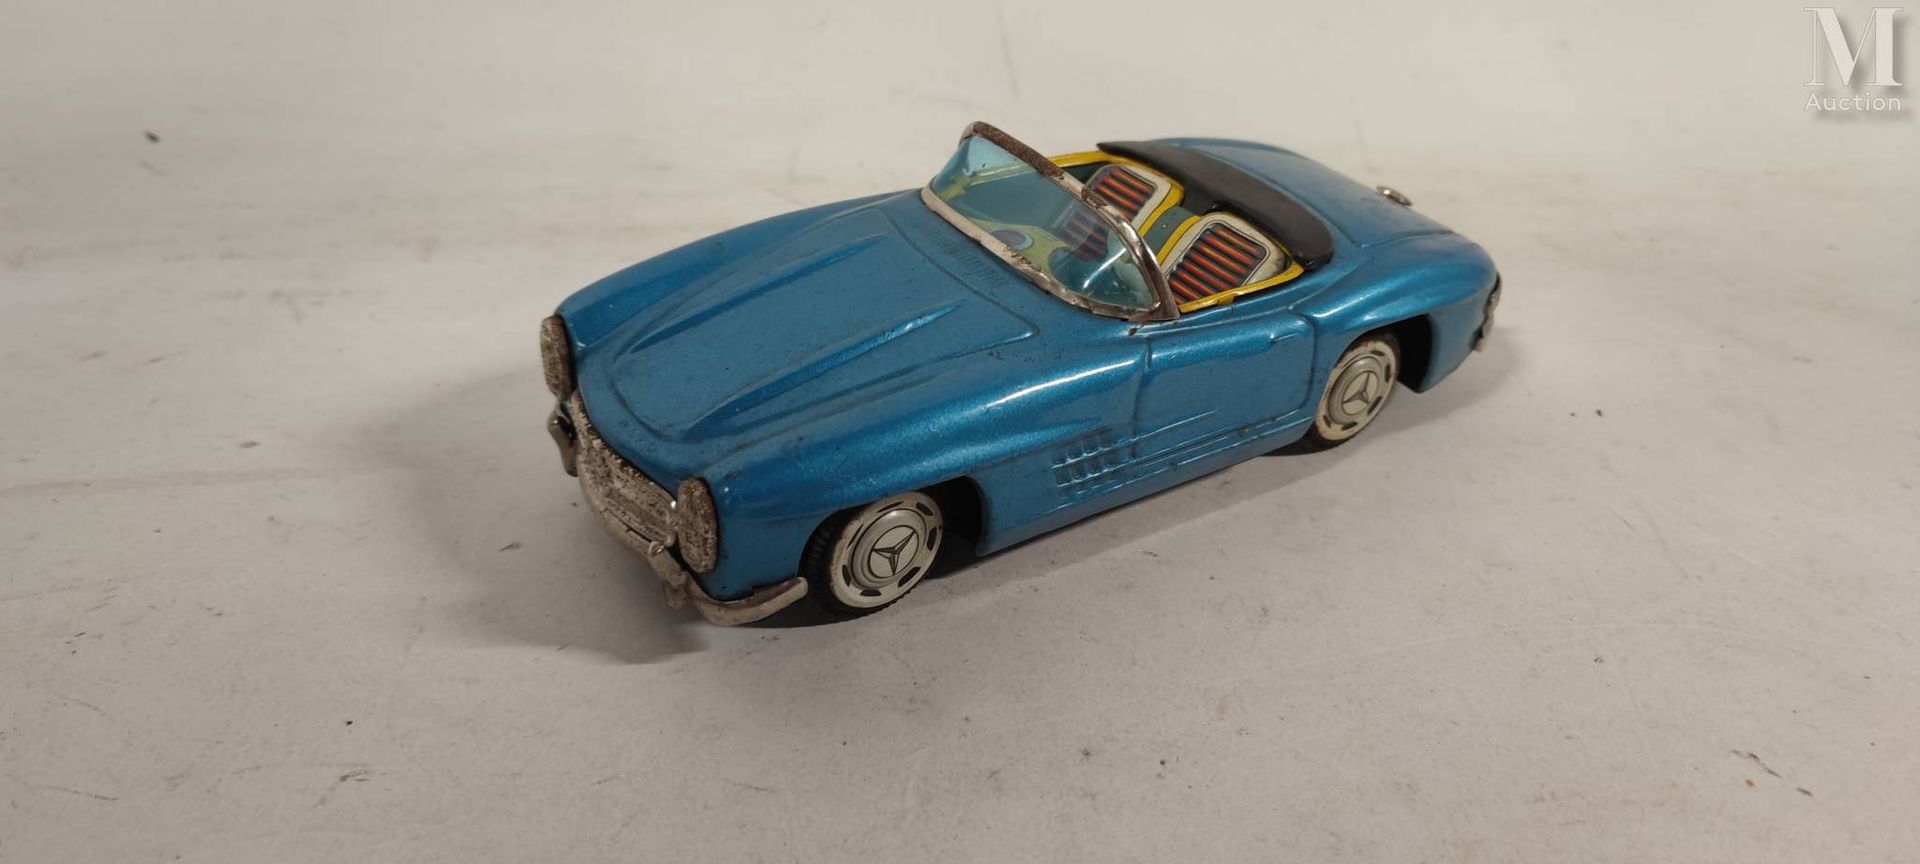 YONEZAWA Mercedes 300 SL

Friction vehicle in polychrome lithographed sheet meta&hellip;